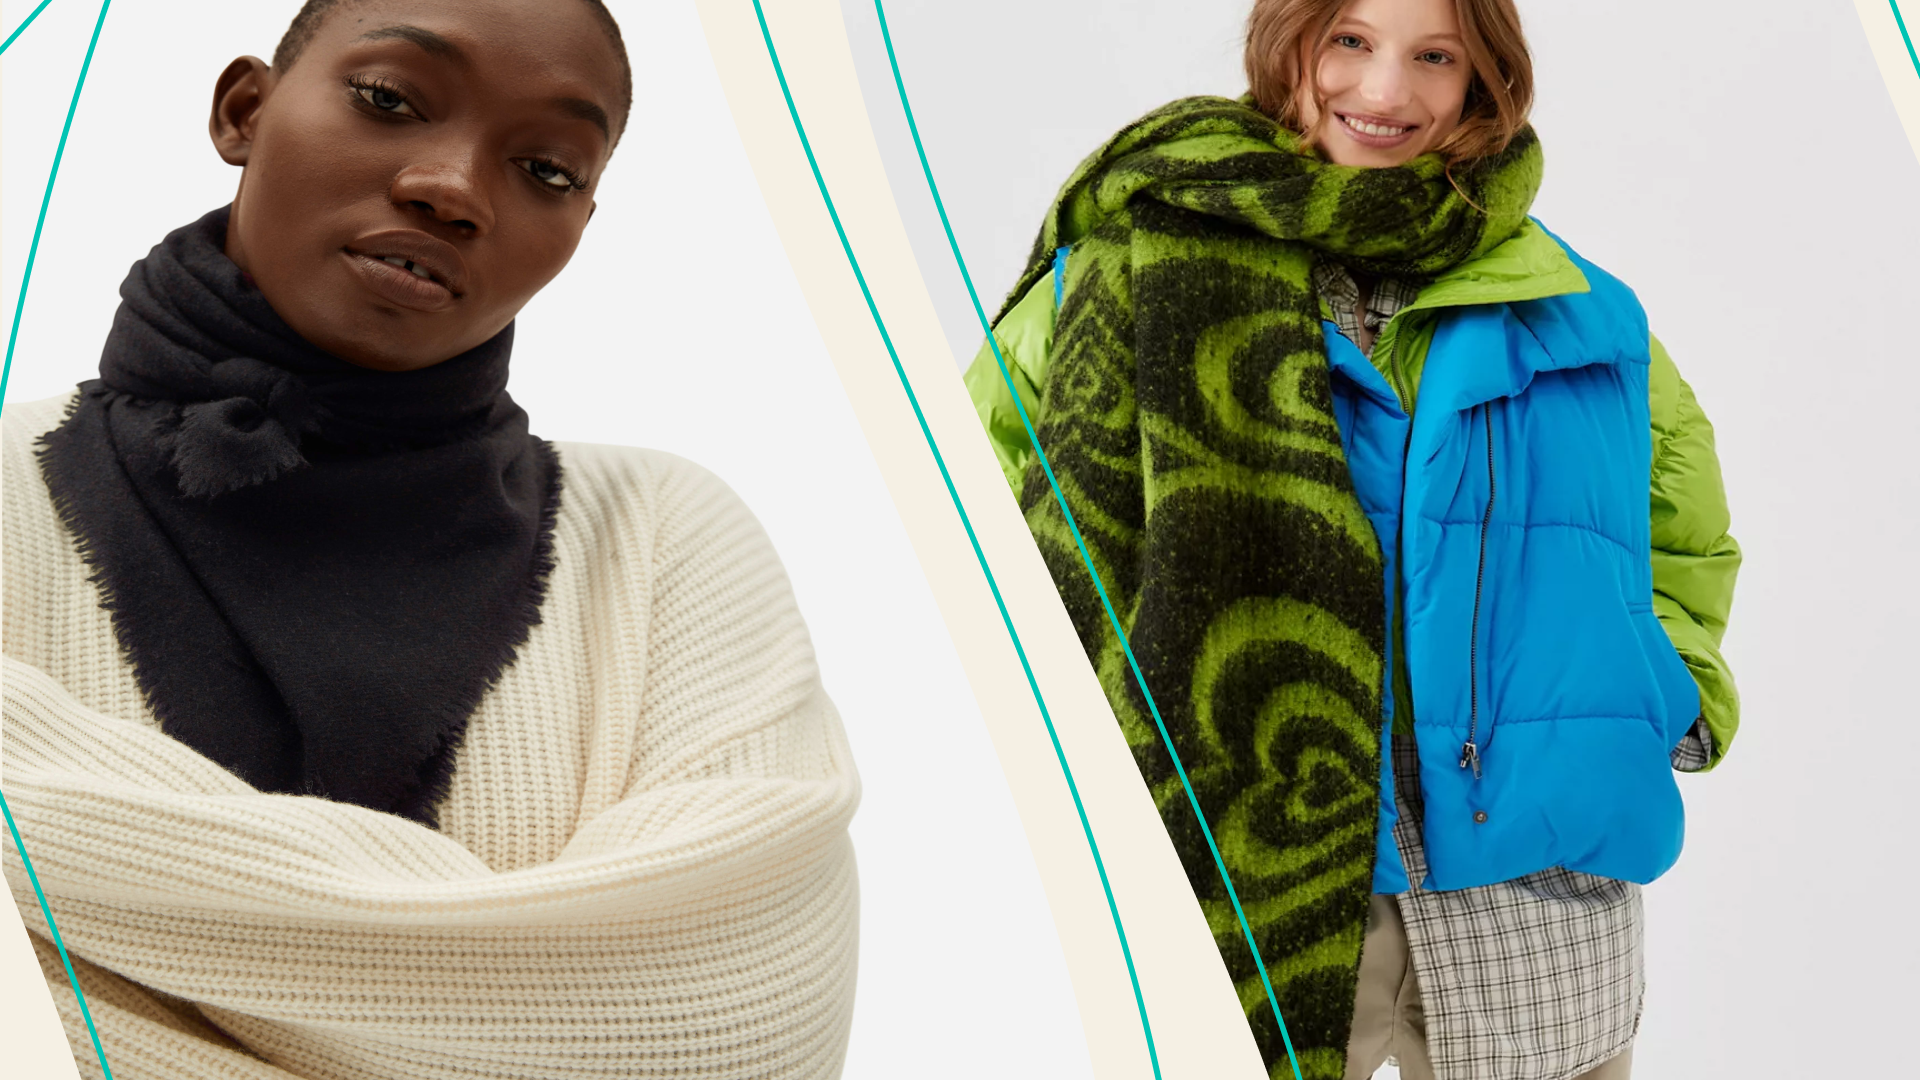 Scarf Aesthetic for Options Every theSkimm Warm and | Winter Snood